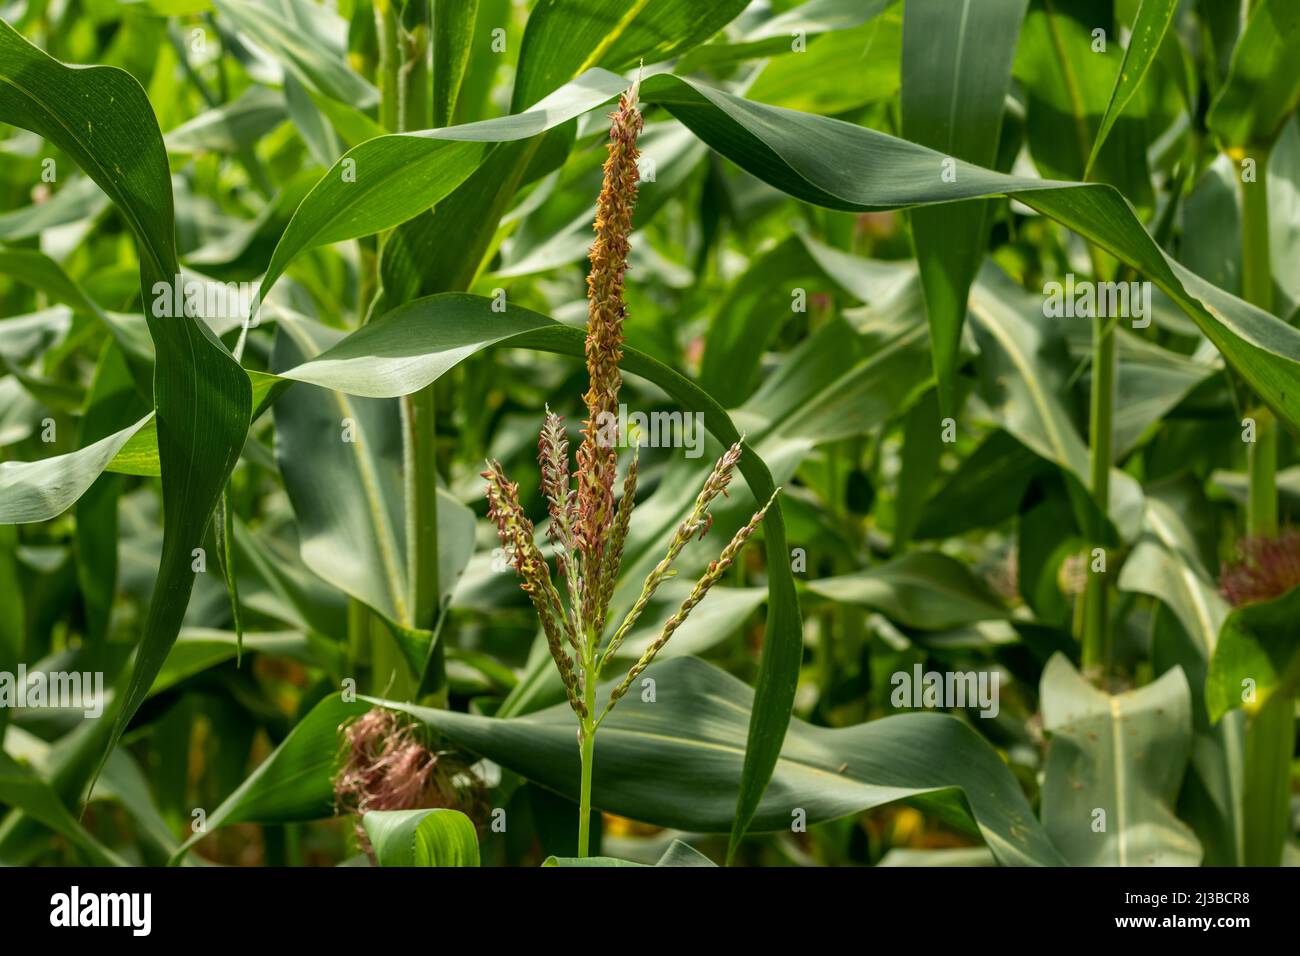 Maize or Corn is a monoecious plant, that is, the sexes are partitioned into separate pistillate, the female flower, and staminate tassel, the male fl Stock Photo